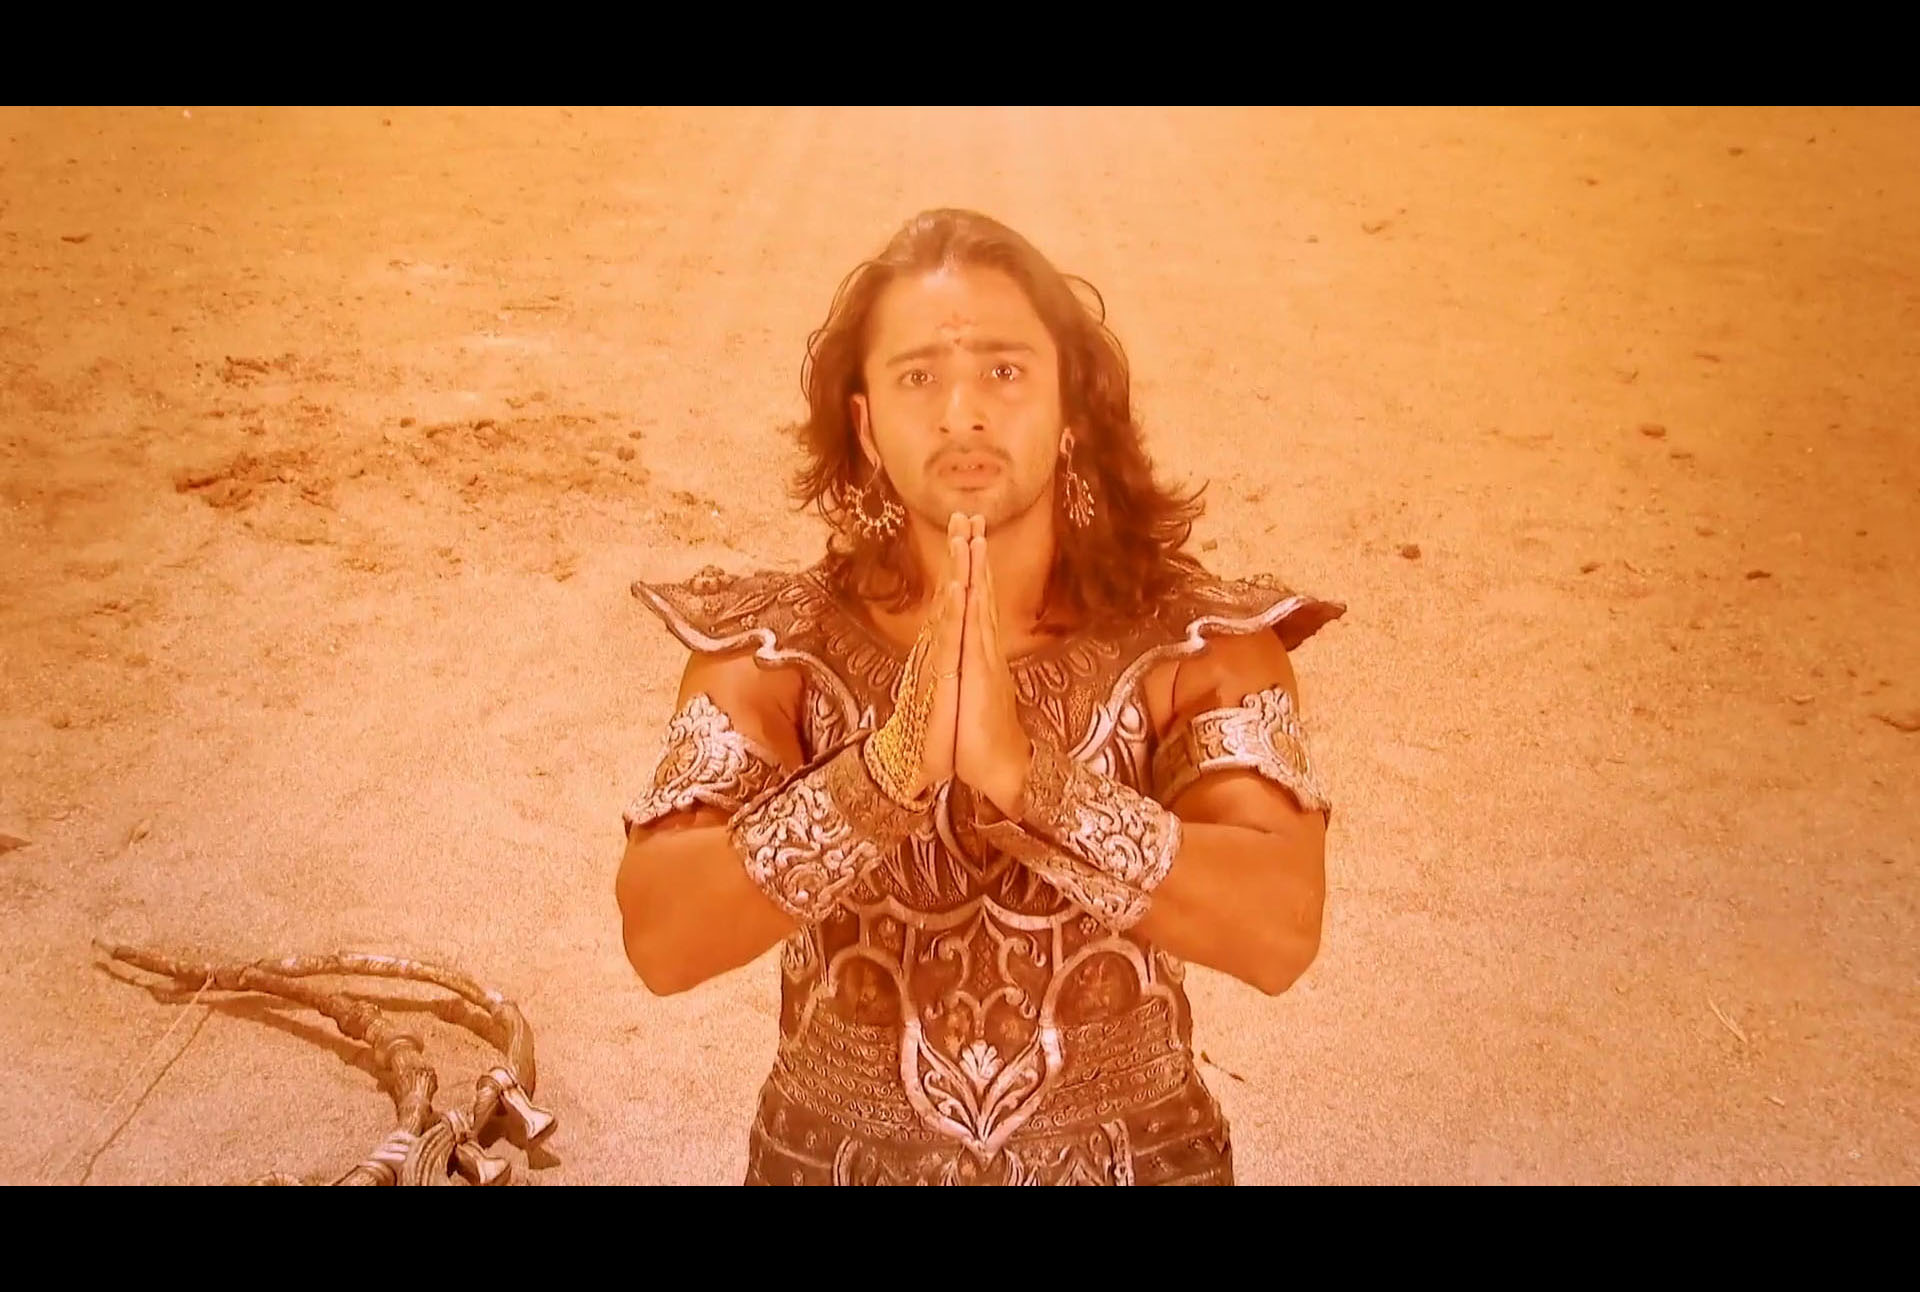 Shaheer Sheikh plays the warrior prince Arjun in the Vishwaroop scene of the Bhagavad Gita in Star Plus Mahabharat (2014), in which Shri Krishna reveals to Arjun the supreme knowledge of his universal form. Arjun is seen kneeling on a dusty battlefield in full armour, his bow cast aside and his hands pressed together in prayer, looking upward in apprehension, reverence and awe.